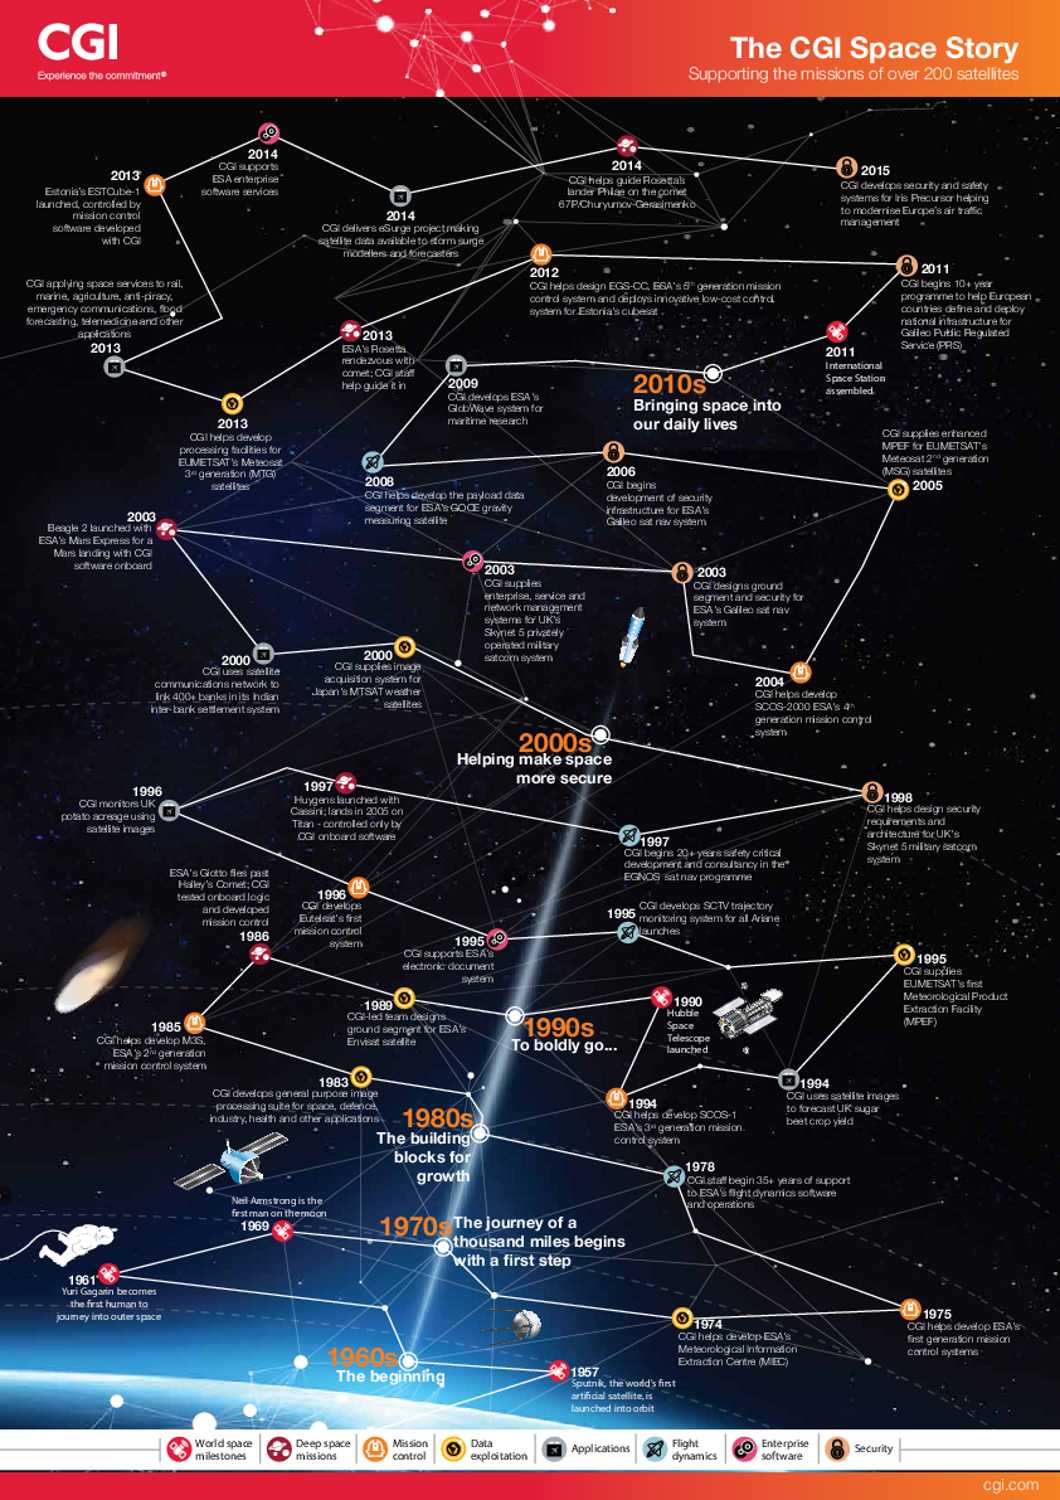 The history of CGI in the space industry